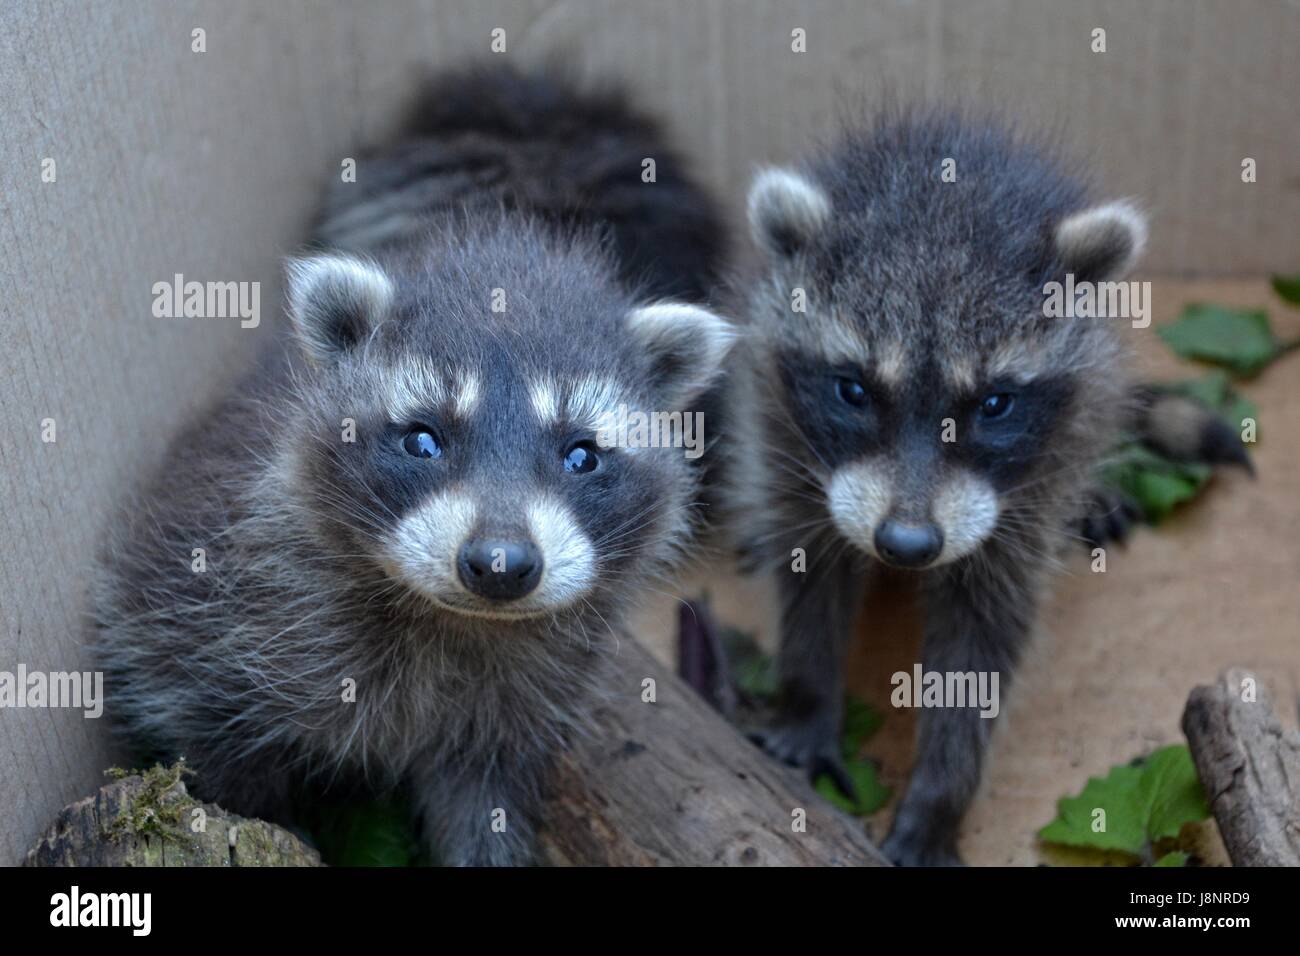 Two small racoons look forwards Stock Photo